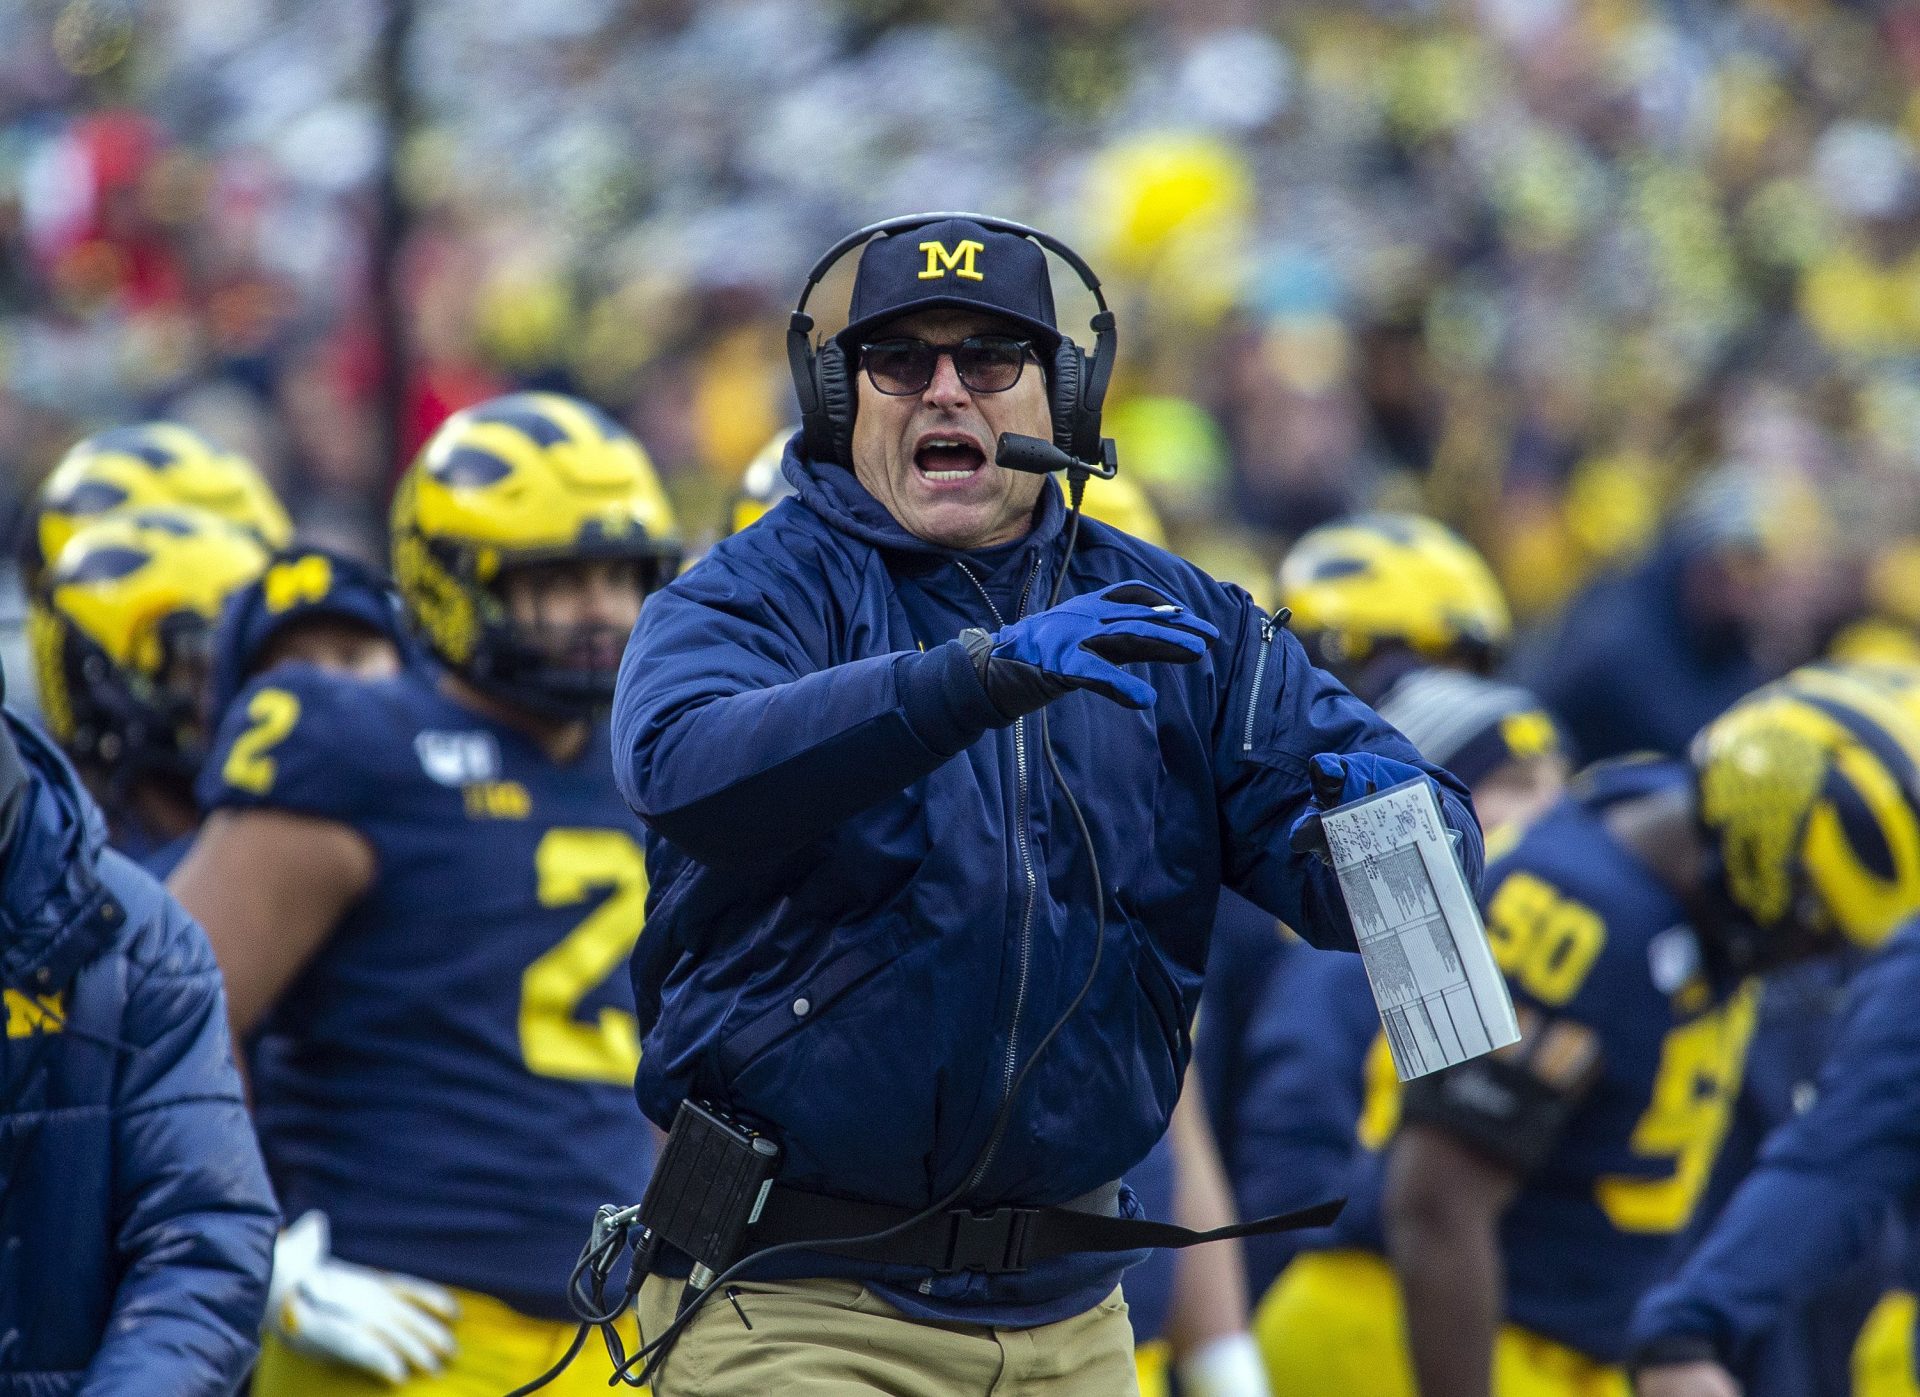 Can also Jim Harbaugh return to NFL after Michigan stint? Insiders divided on embattled coach